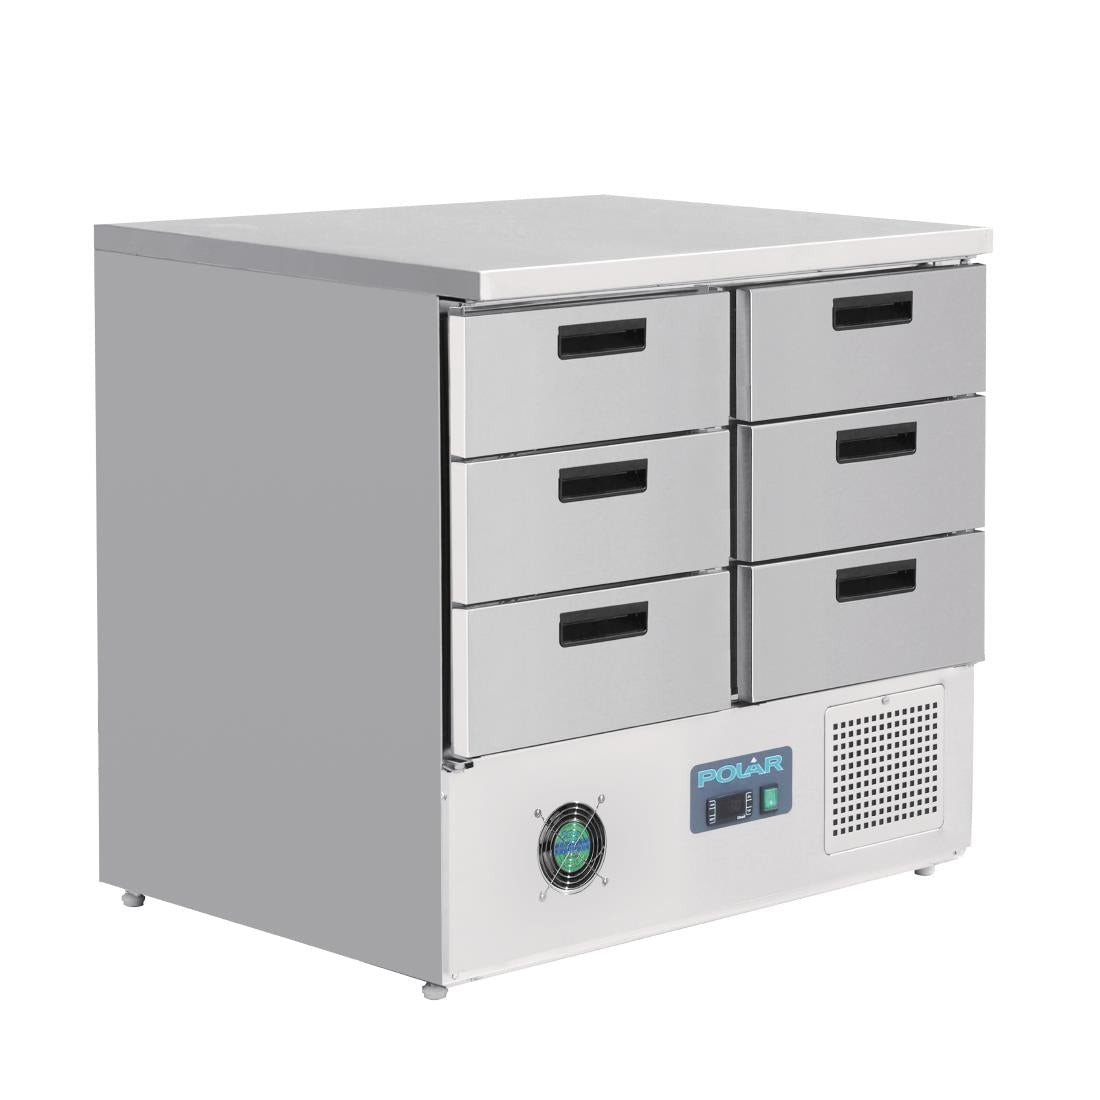 FA440 Polar G-Series Refrigerated Counter with 6 Drawers 240Ltr